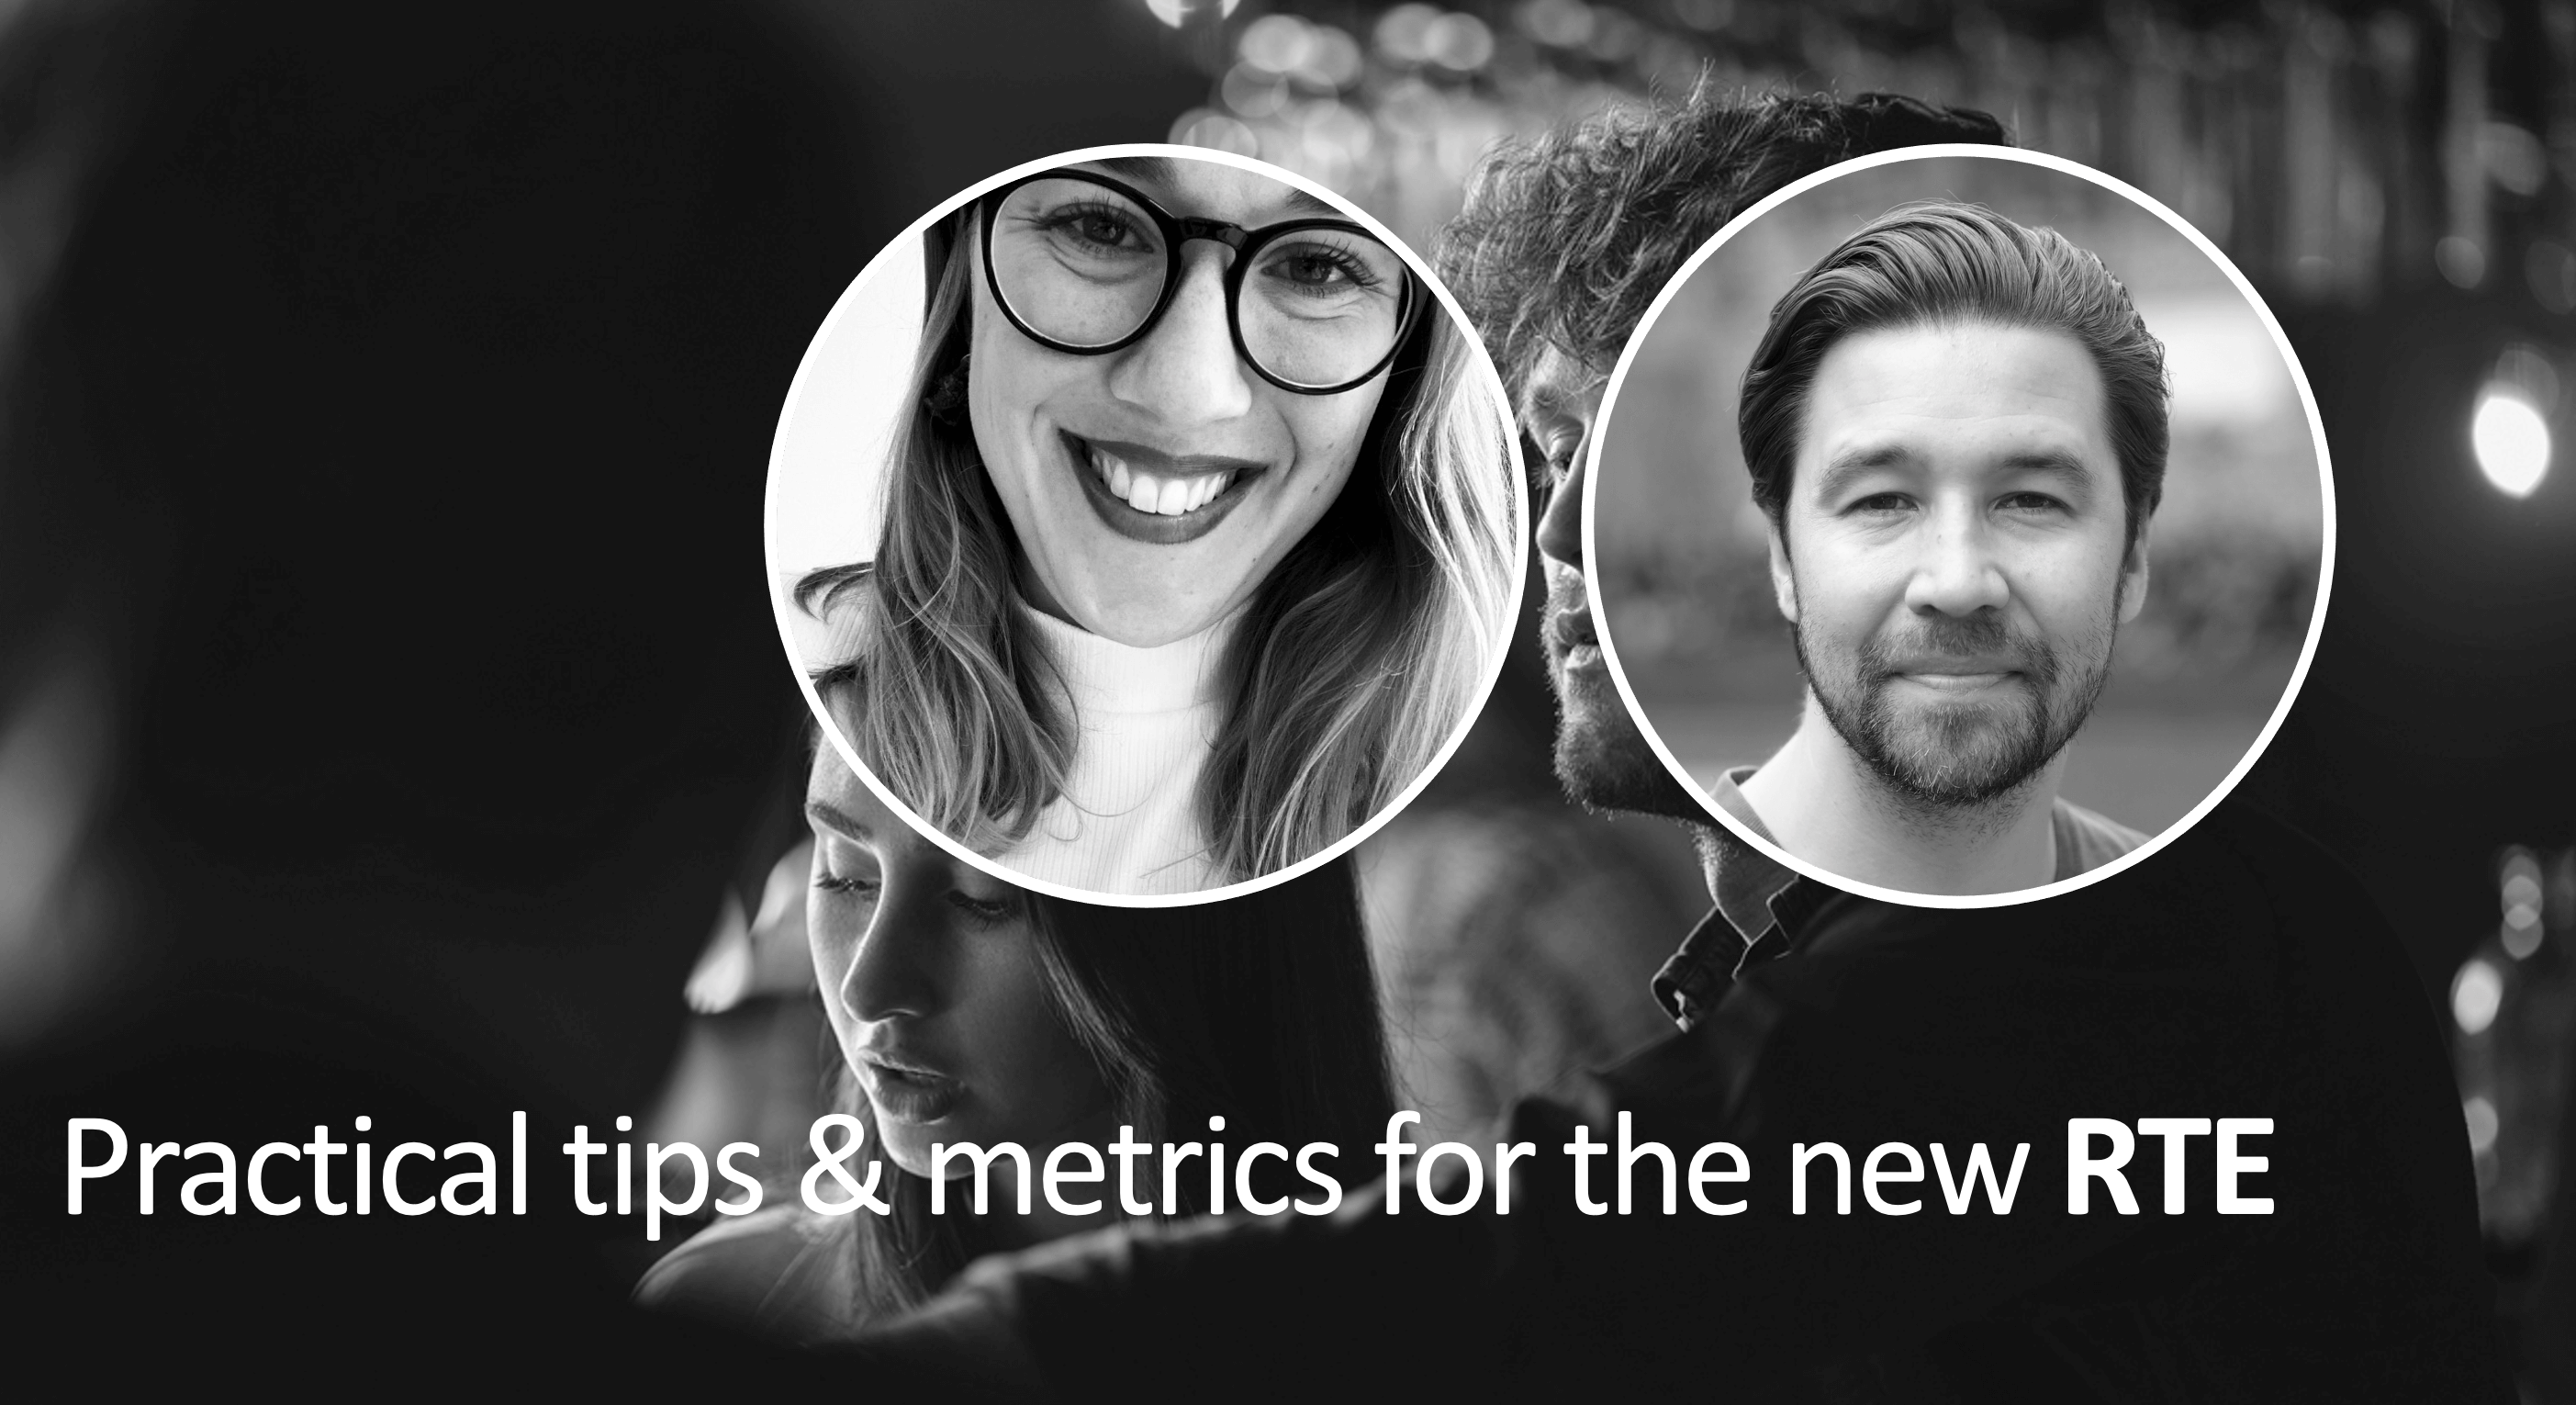 Video: Practical tips & metric for the new RTE